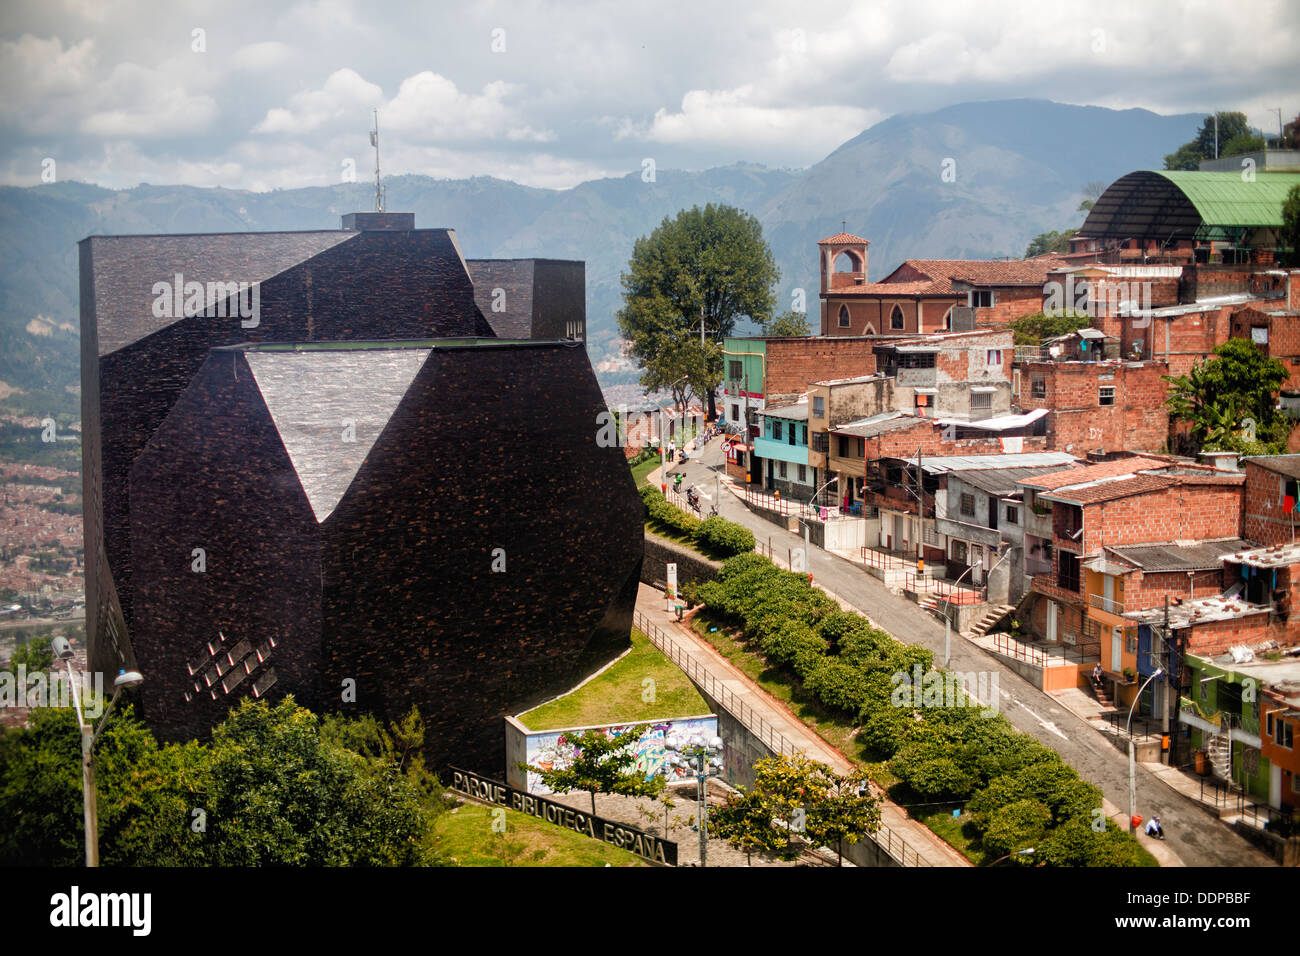 Medellin, Colombia - 'Parque Biblioteca España' a public library in the hillsides of one of the poorer neighborhoods of the city Stock Photo